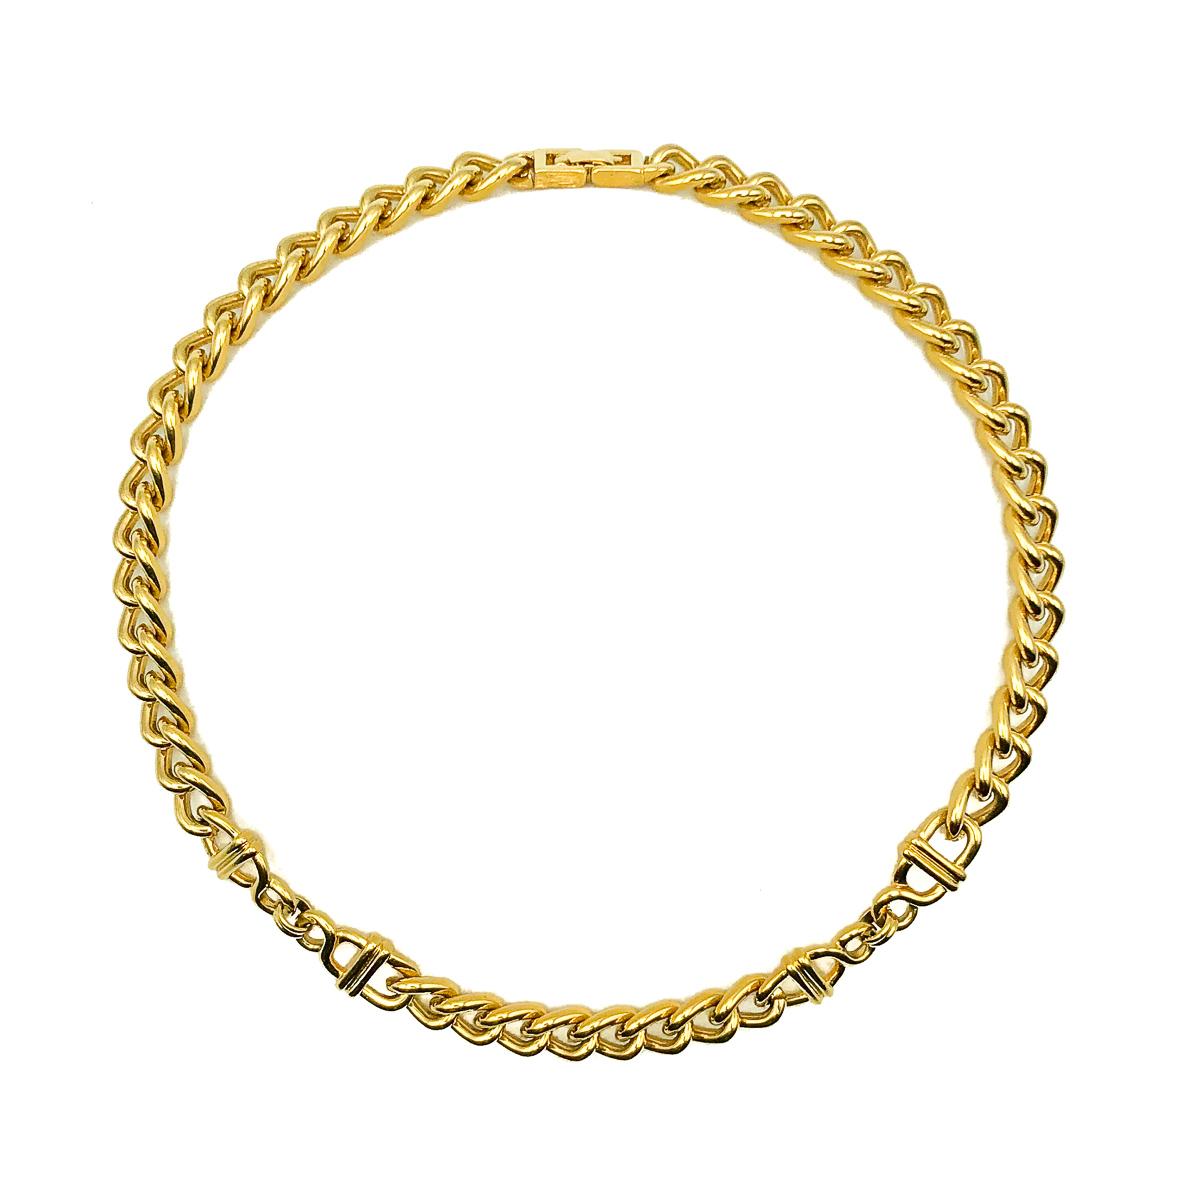 A Vintage Monet Fancy Link Chain. Crafted in gold plated metal. Substantial and wonderful quality. Very good vintage condition, signed, 43cms. Wonderfully stylish for all occasions. 

Established in 2016, this is a British brand that is already